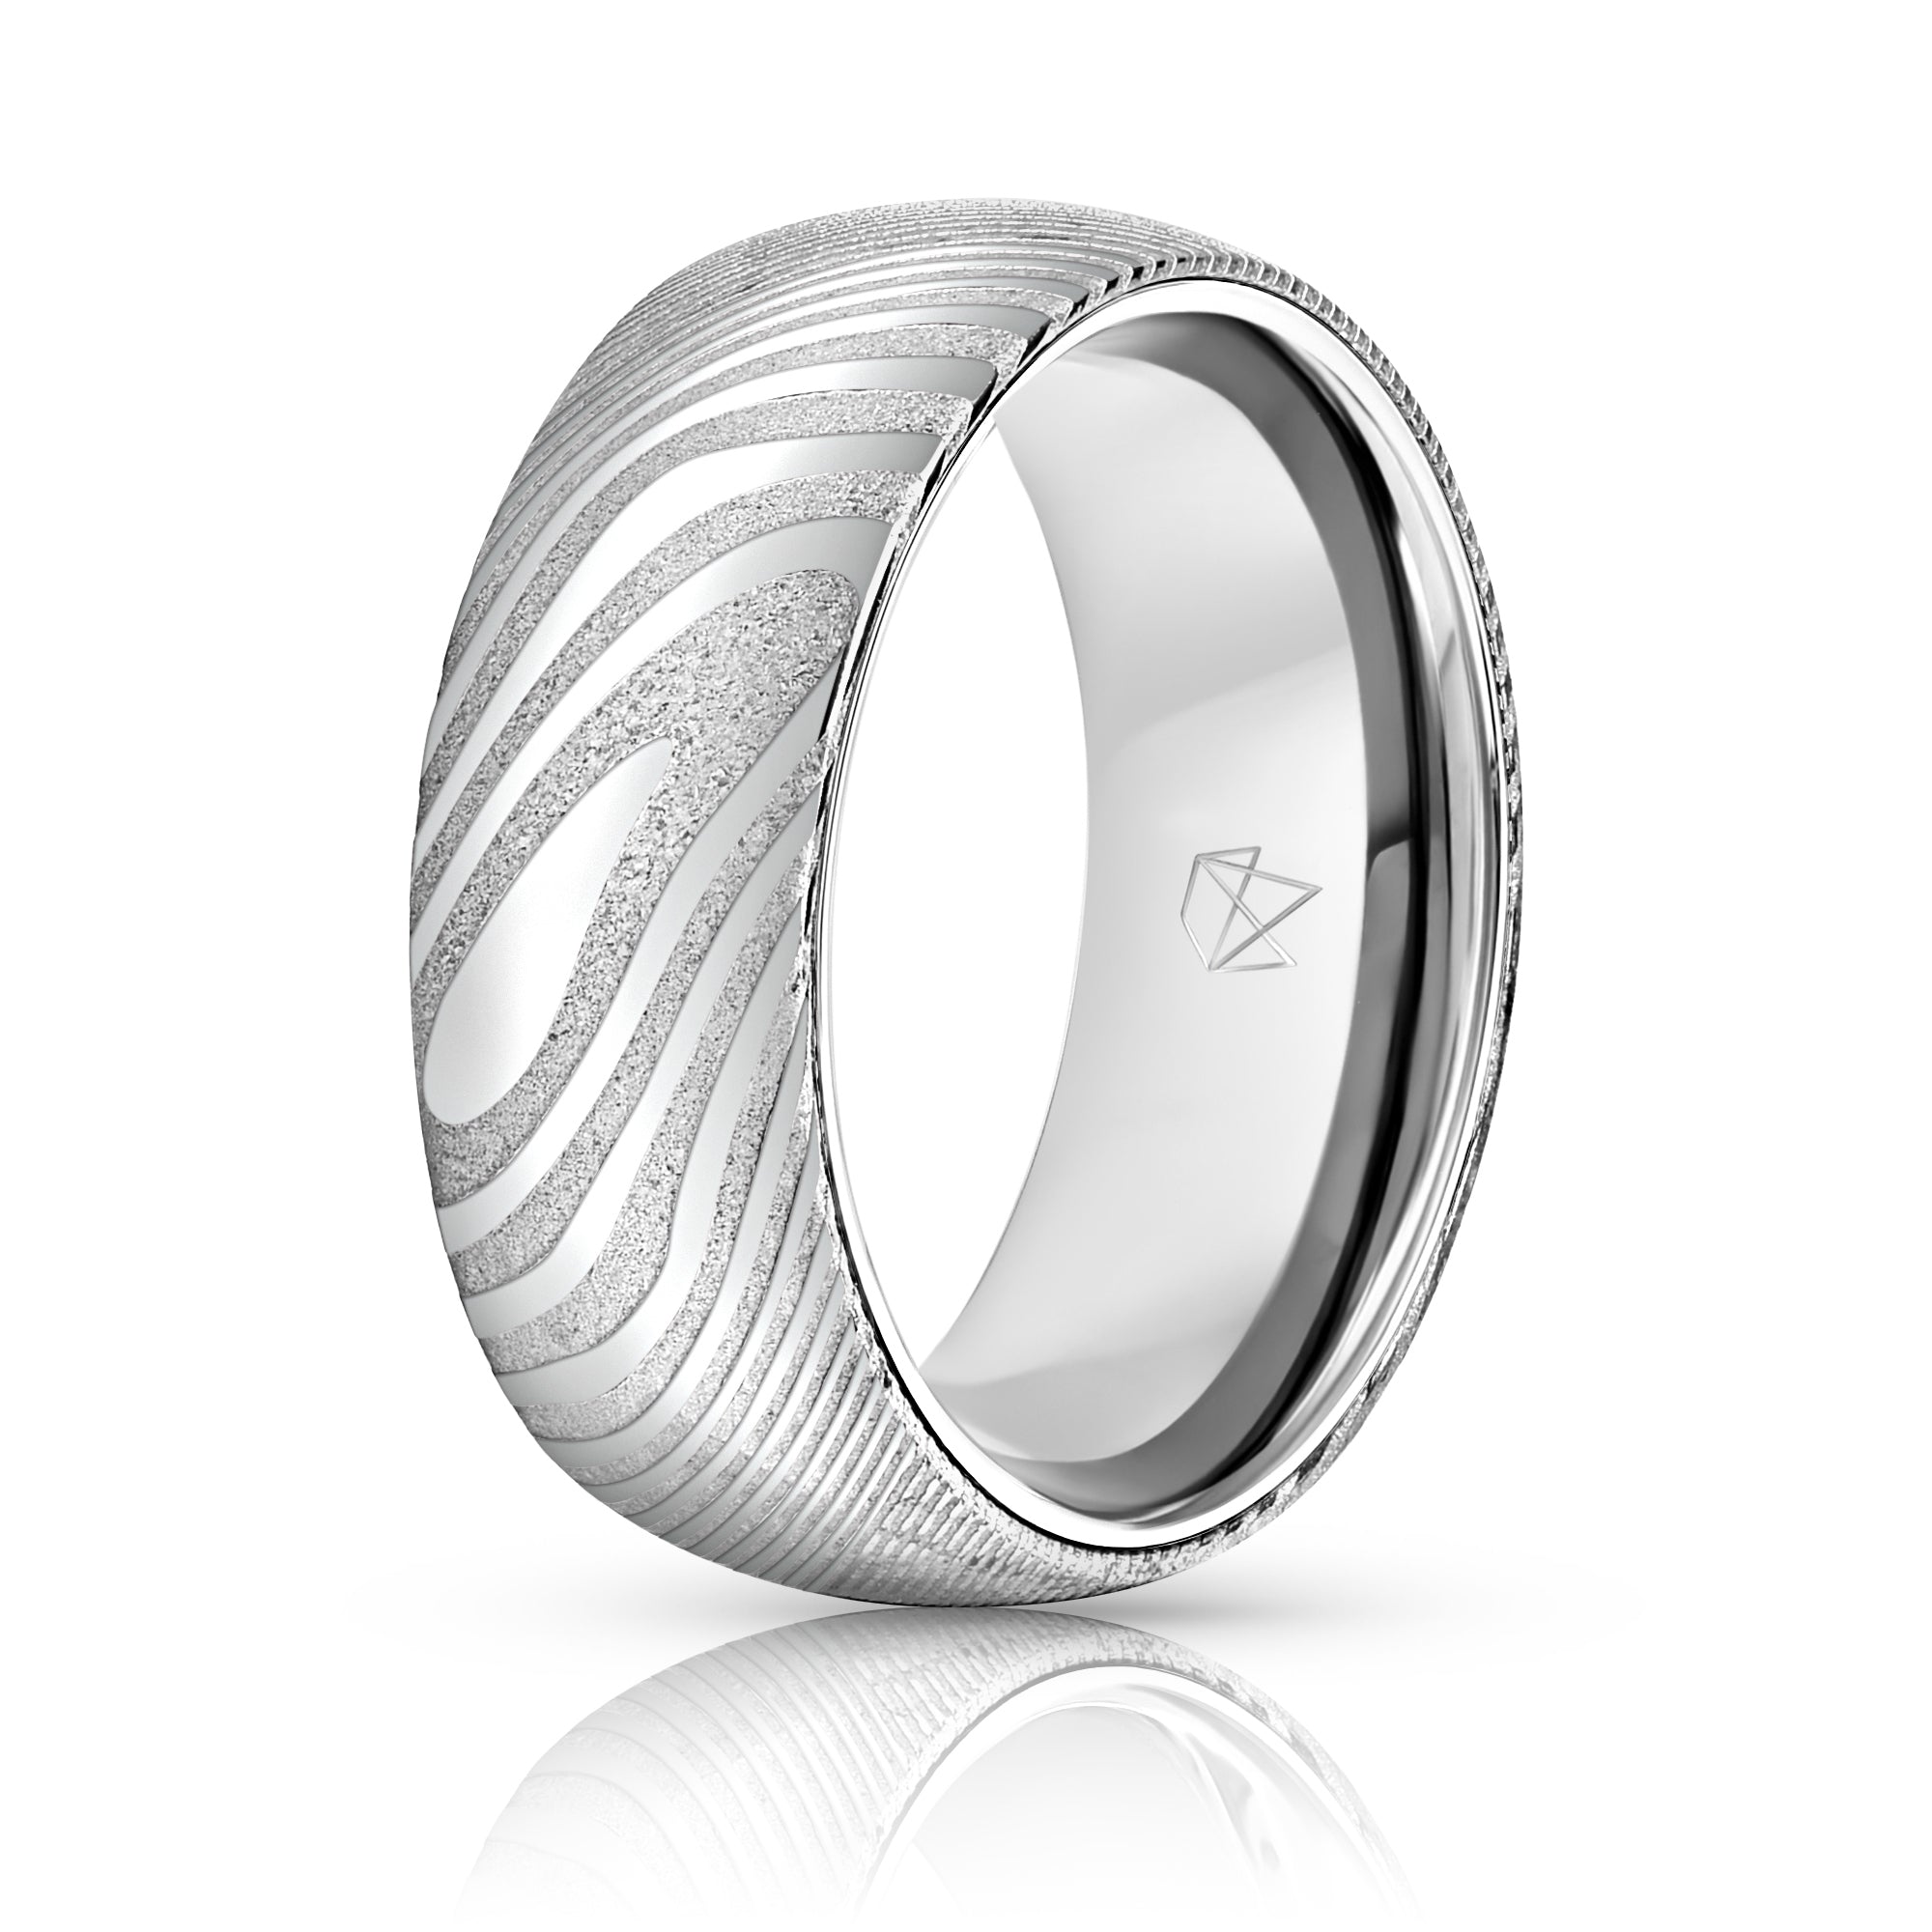 EMBR™ Wood Grain Damascus Steel Ring - .925 Sterling Silver